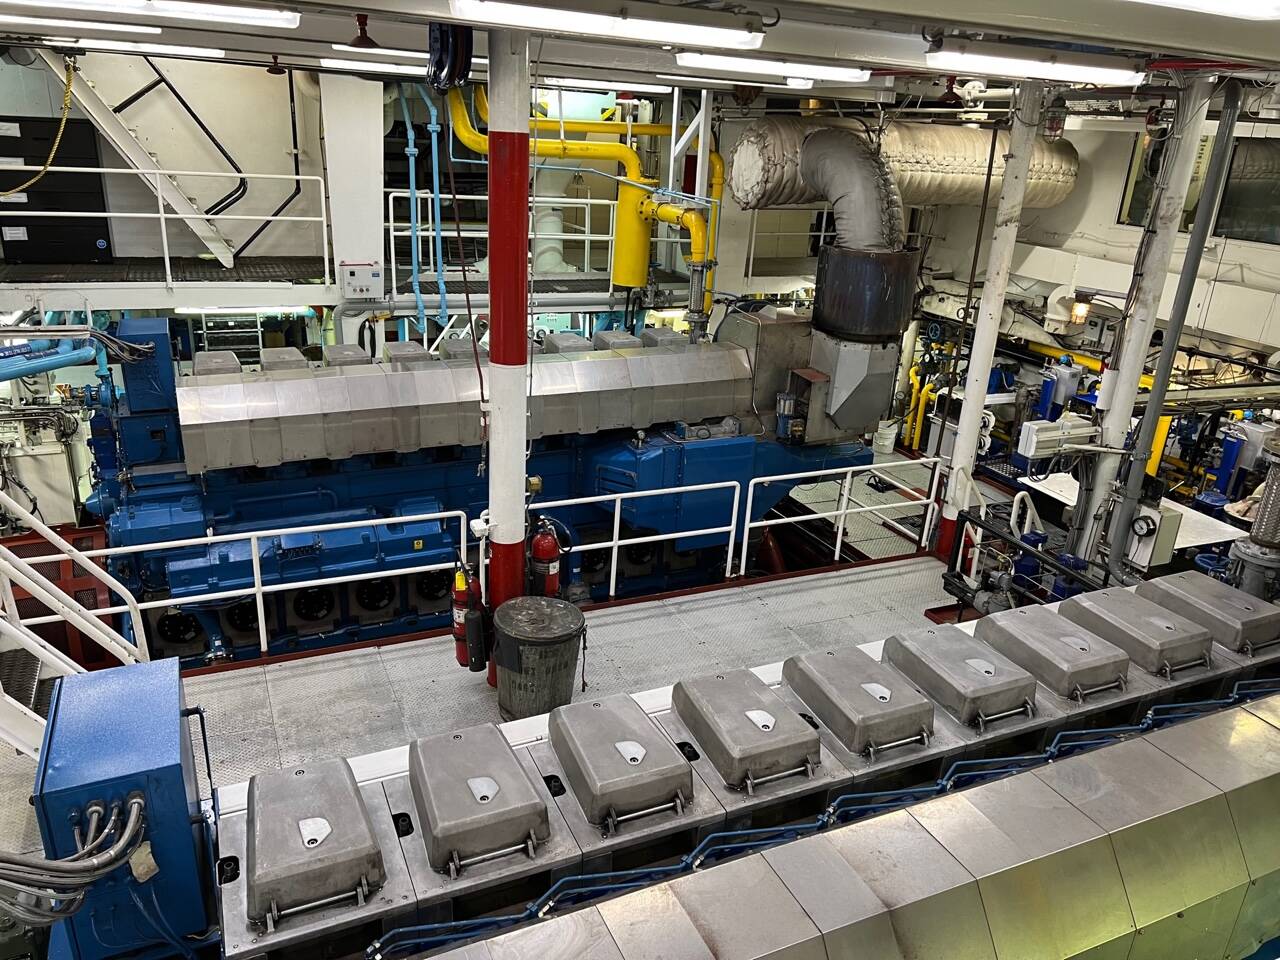 A major refit of the Columbia ferry in 2015 included the installation of two new Wartsila engines, seen here in mid-July. (Meredith Jordan / Juneau Empire).